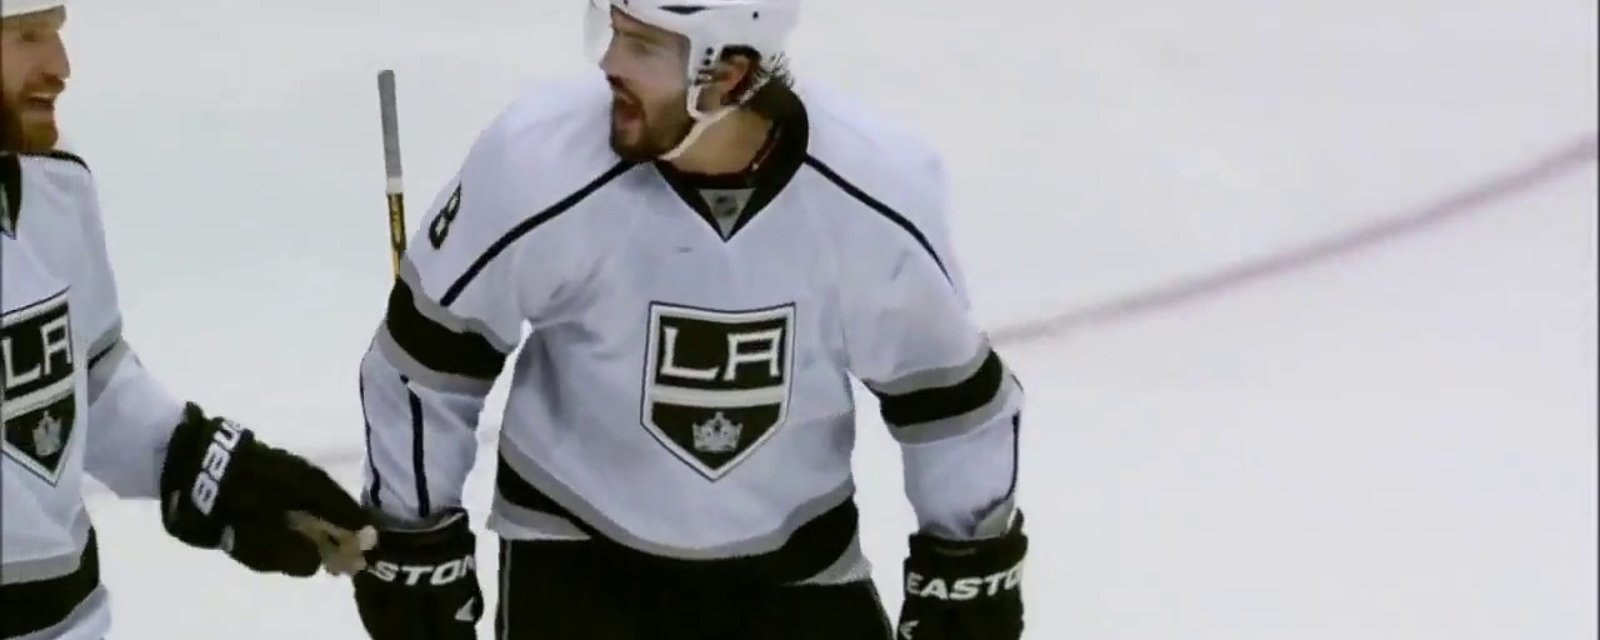 Drew Doughty received the worst gift possible! 